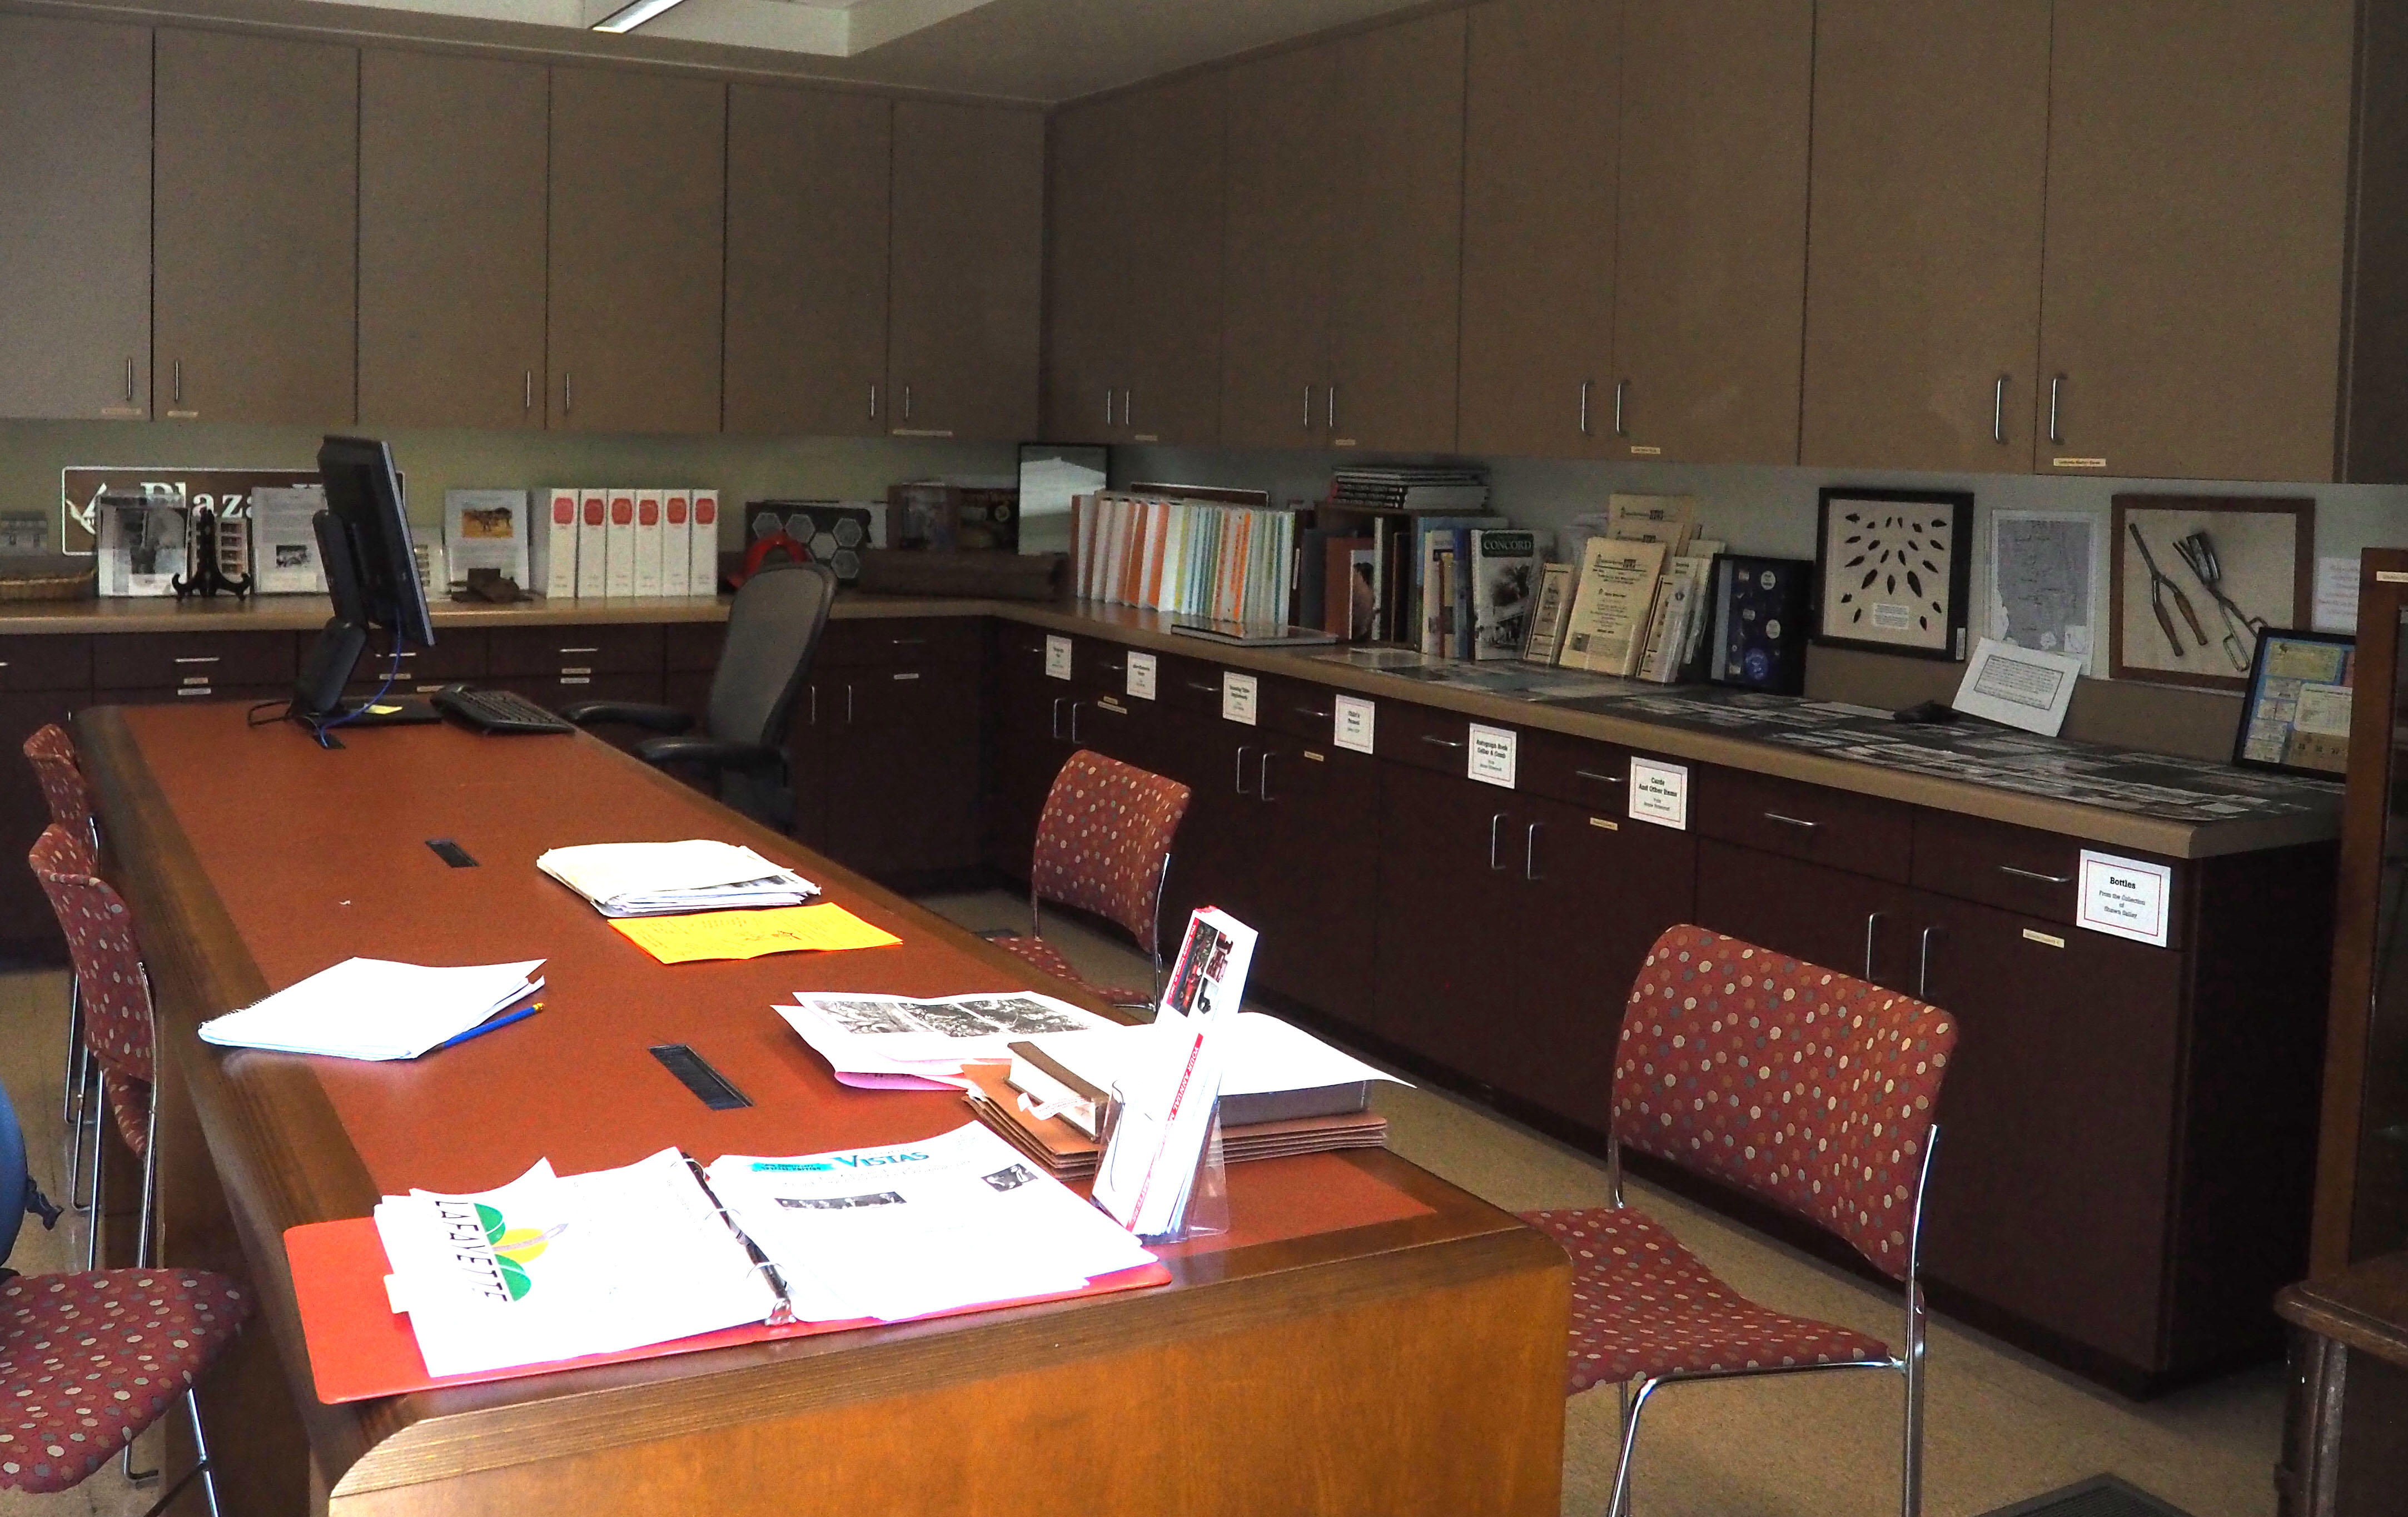 LHS Work Area and Books